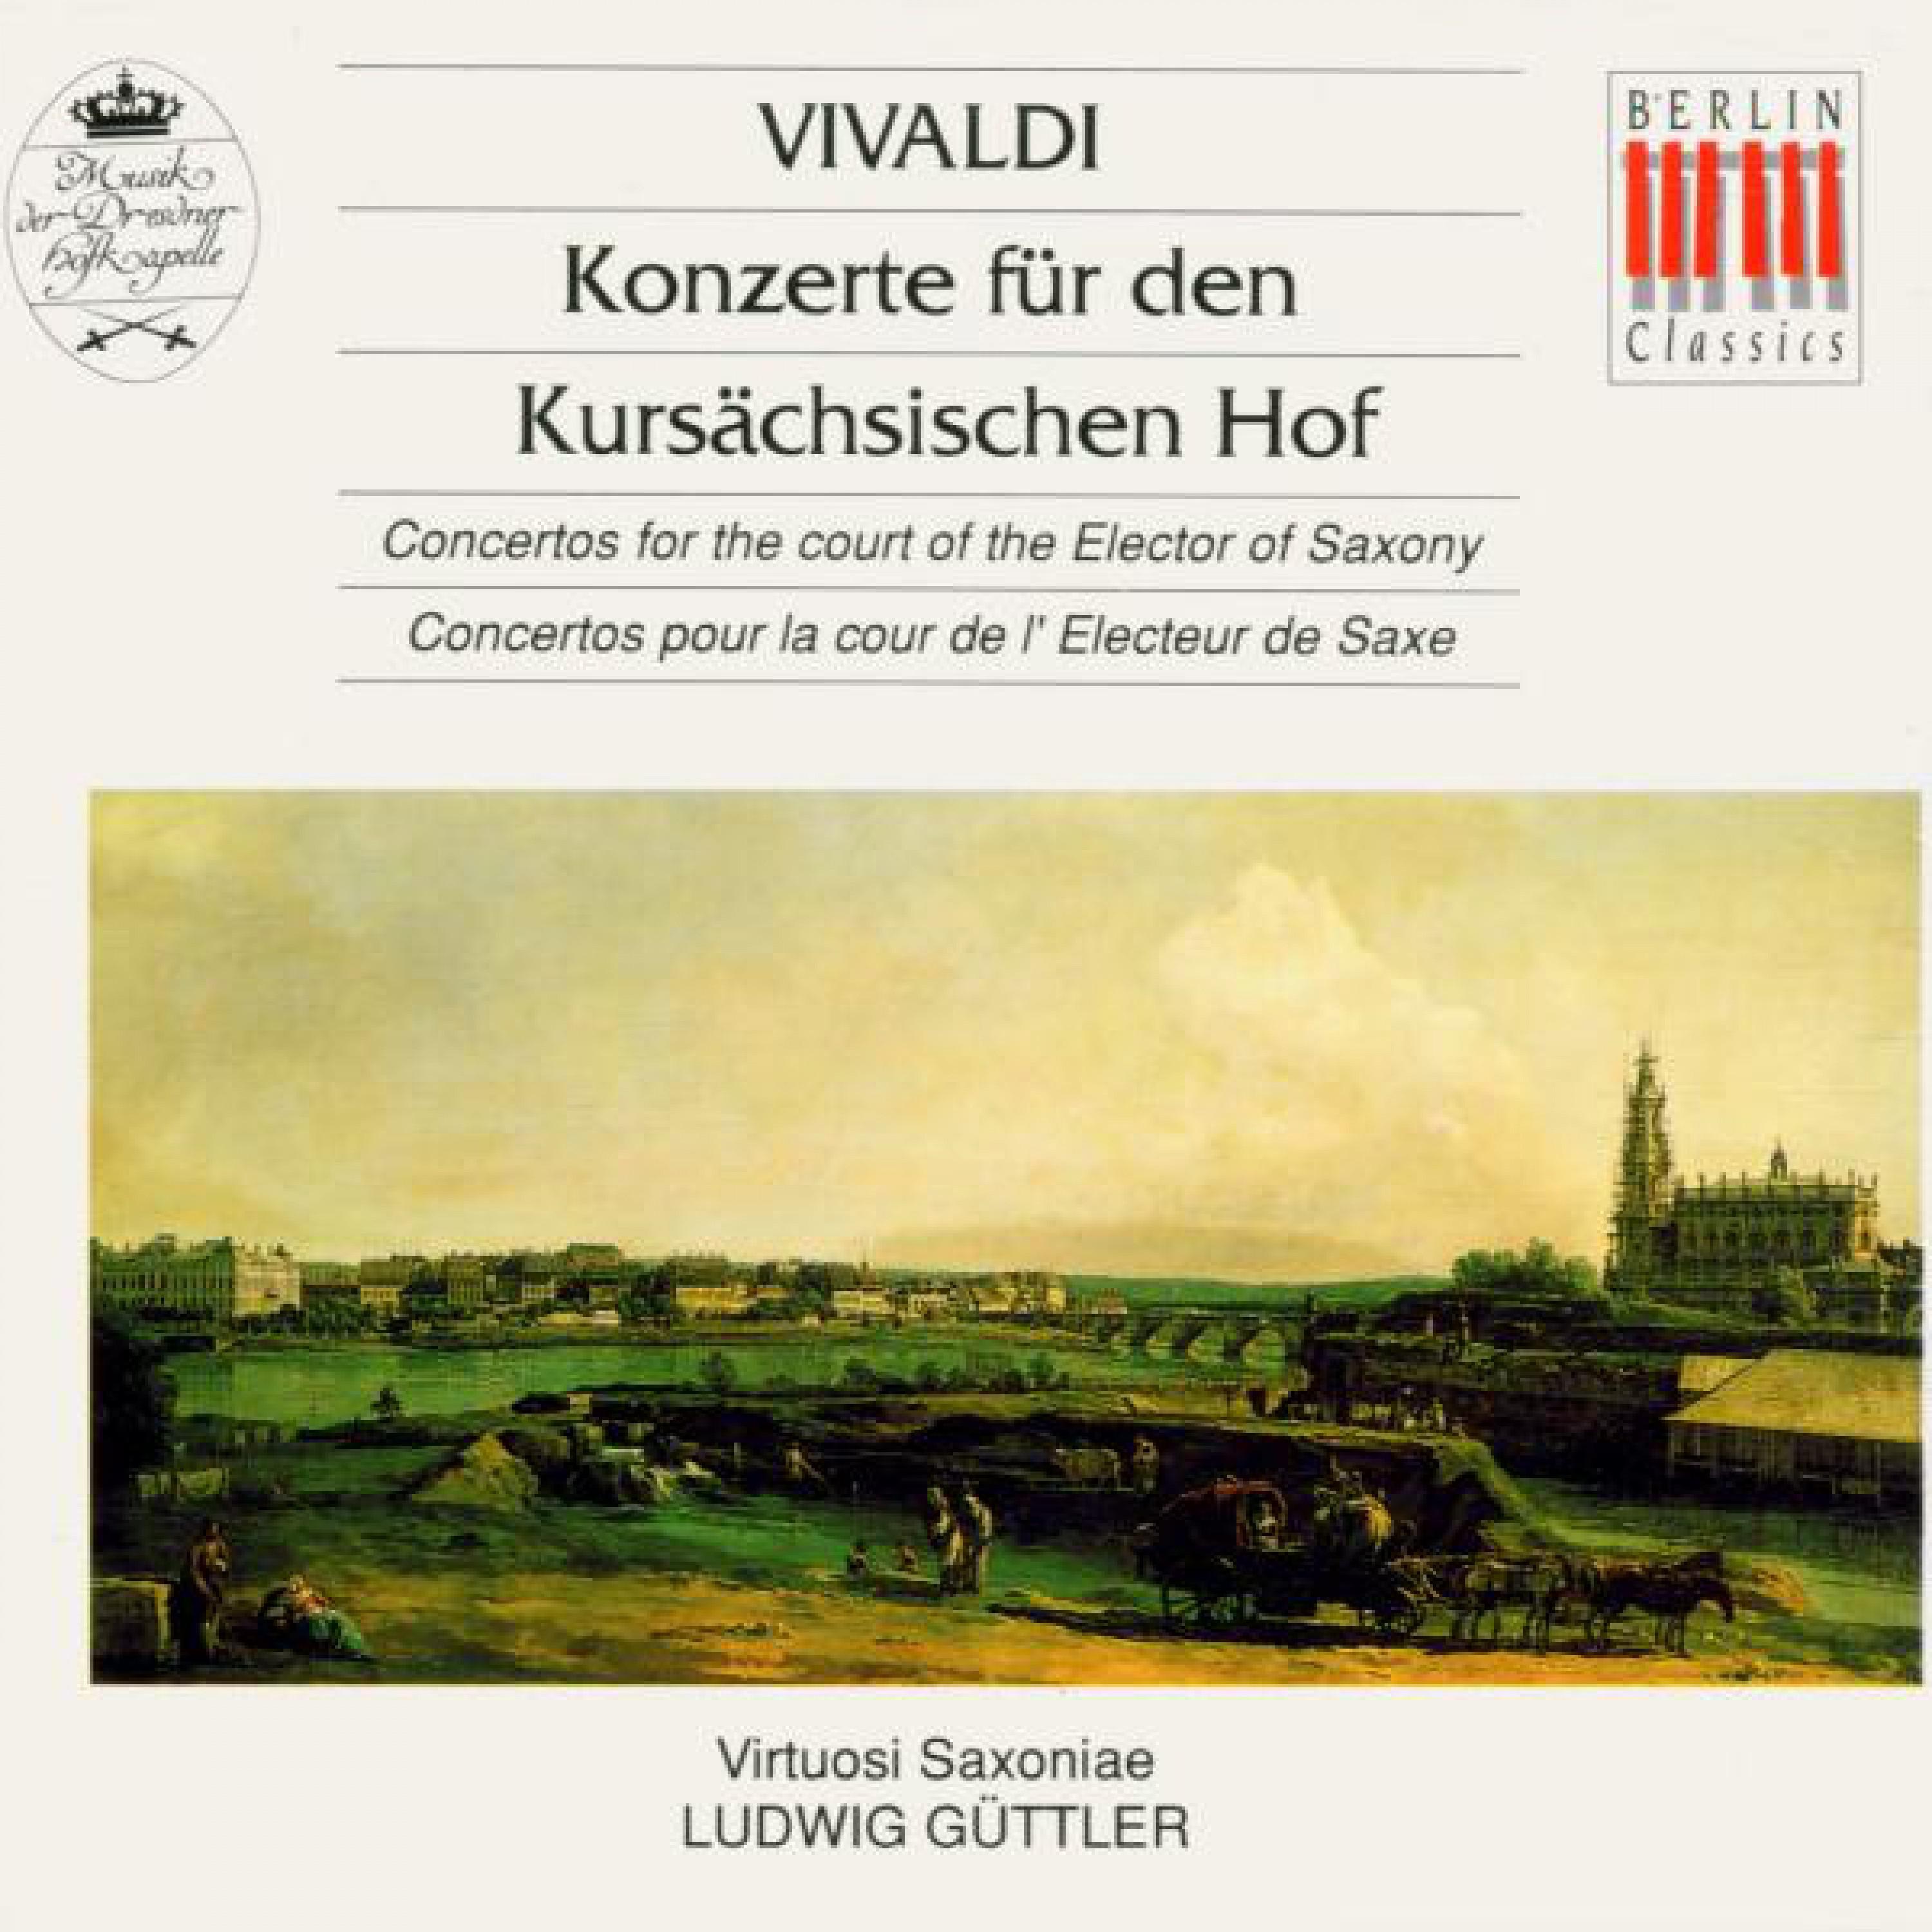 Vivaldi.: Concertos for the court of the Elector of Saxony